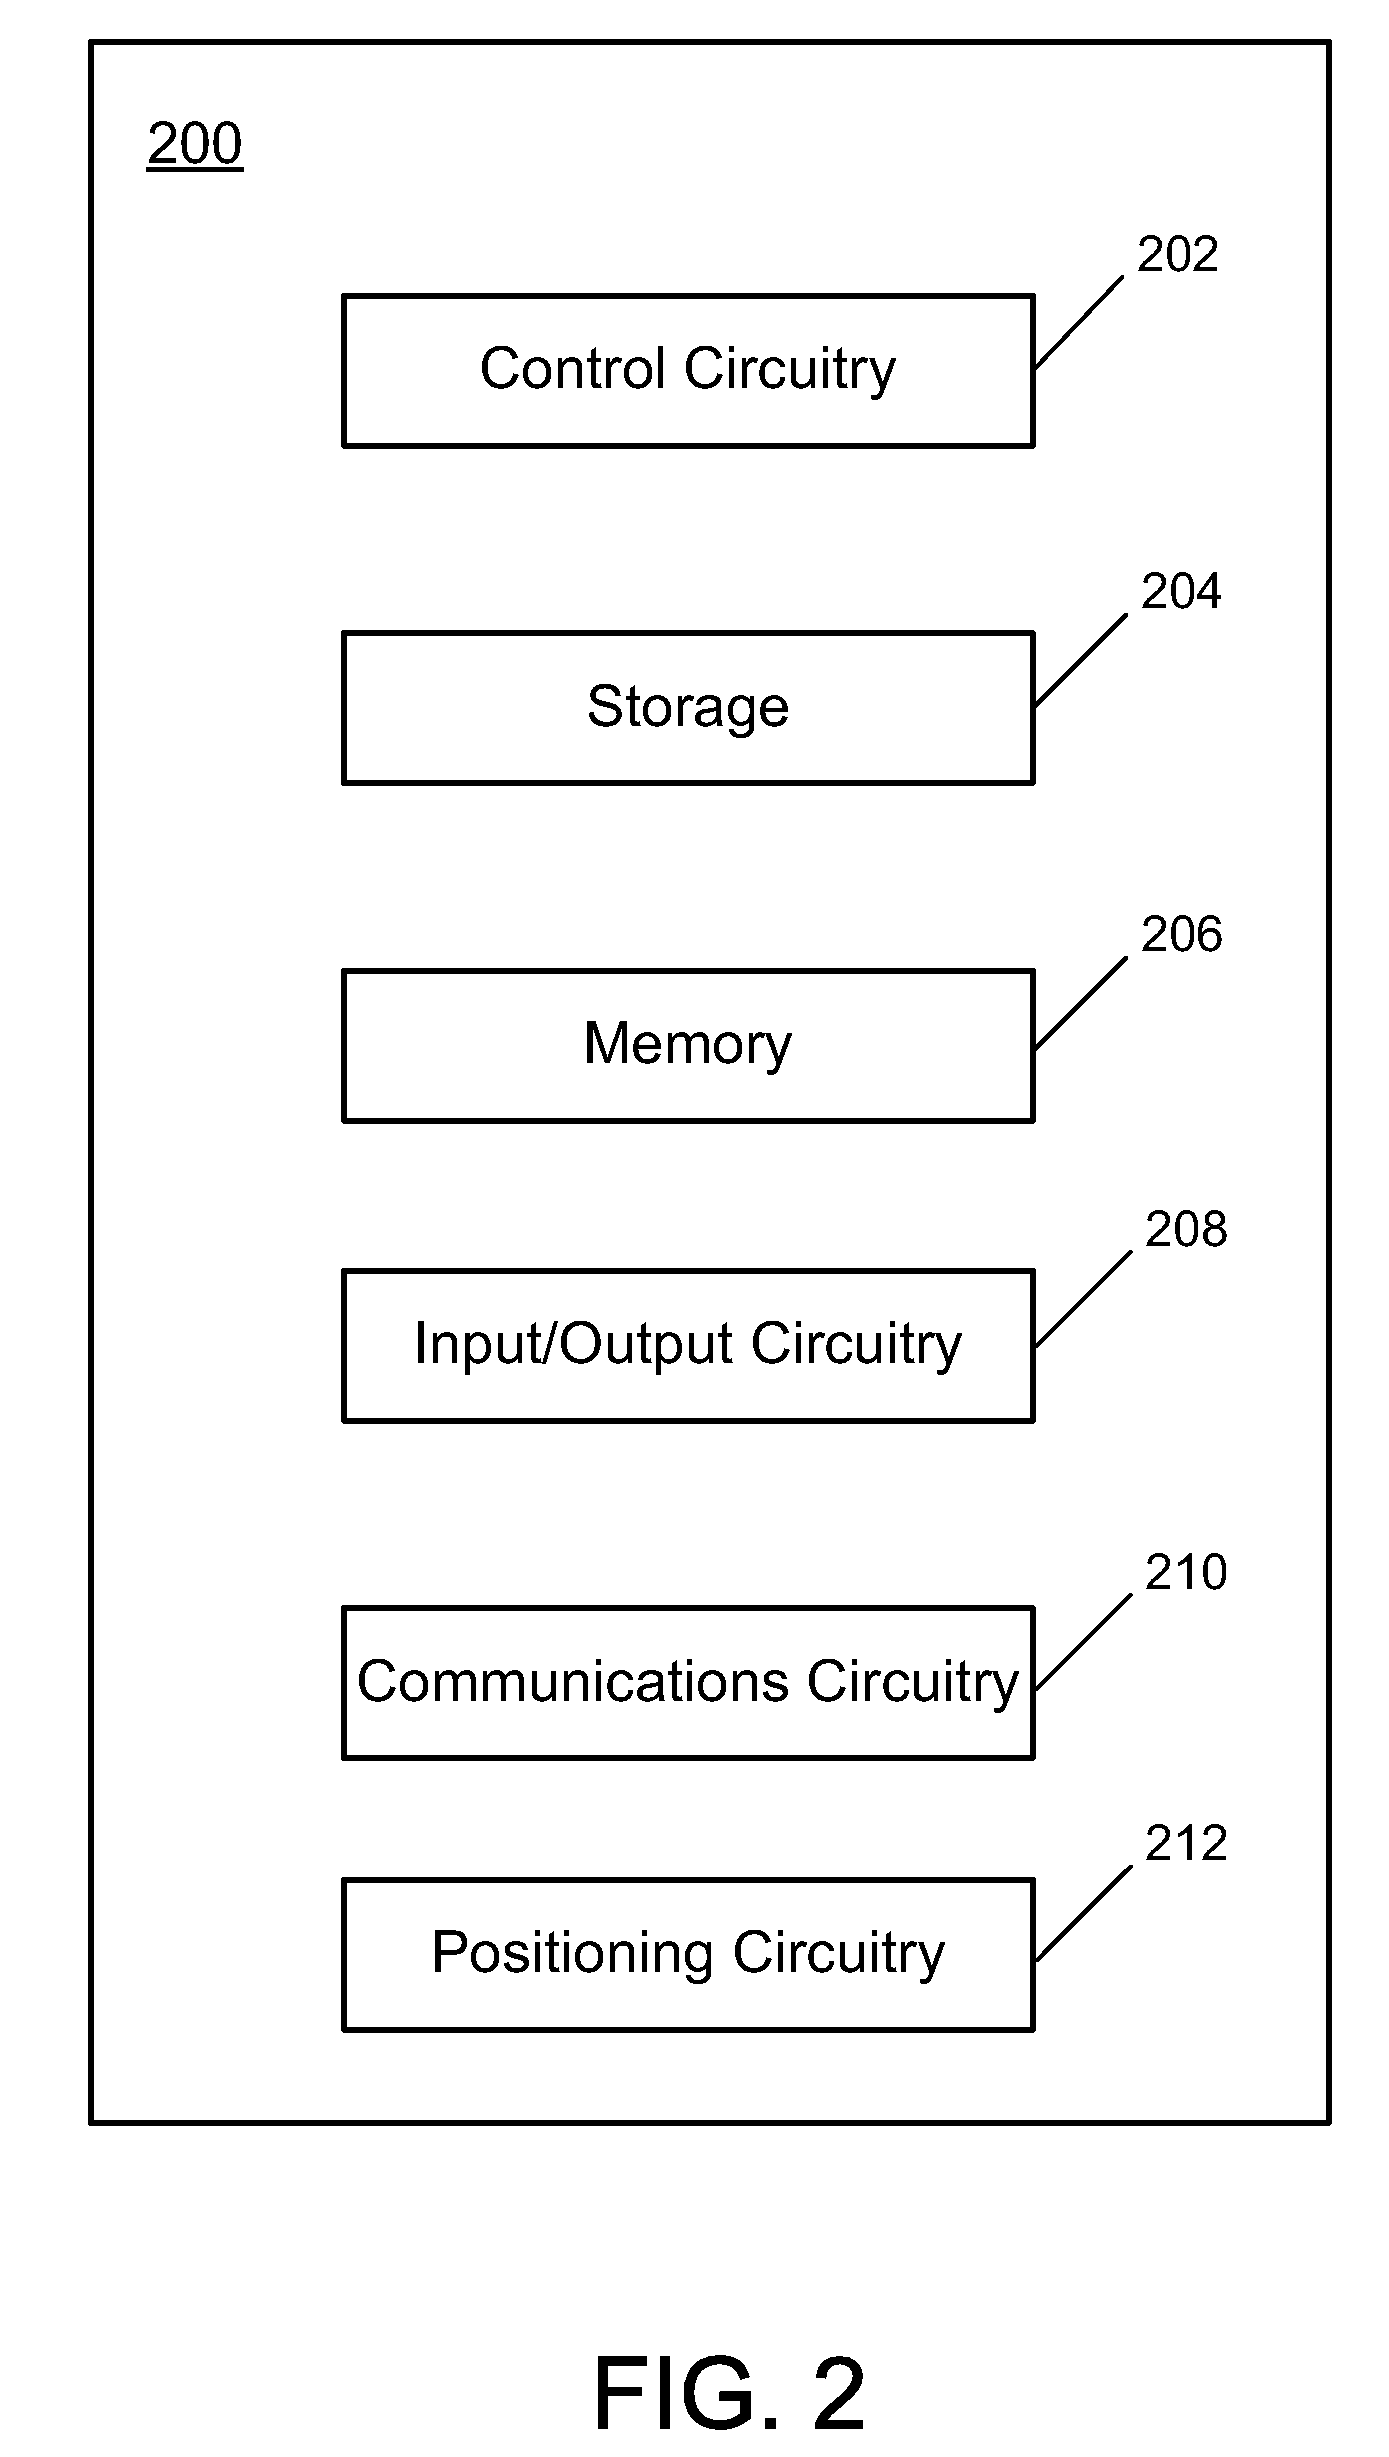 Systems and methods for identifying unauthorized users of an electronic device